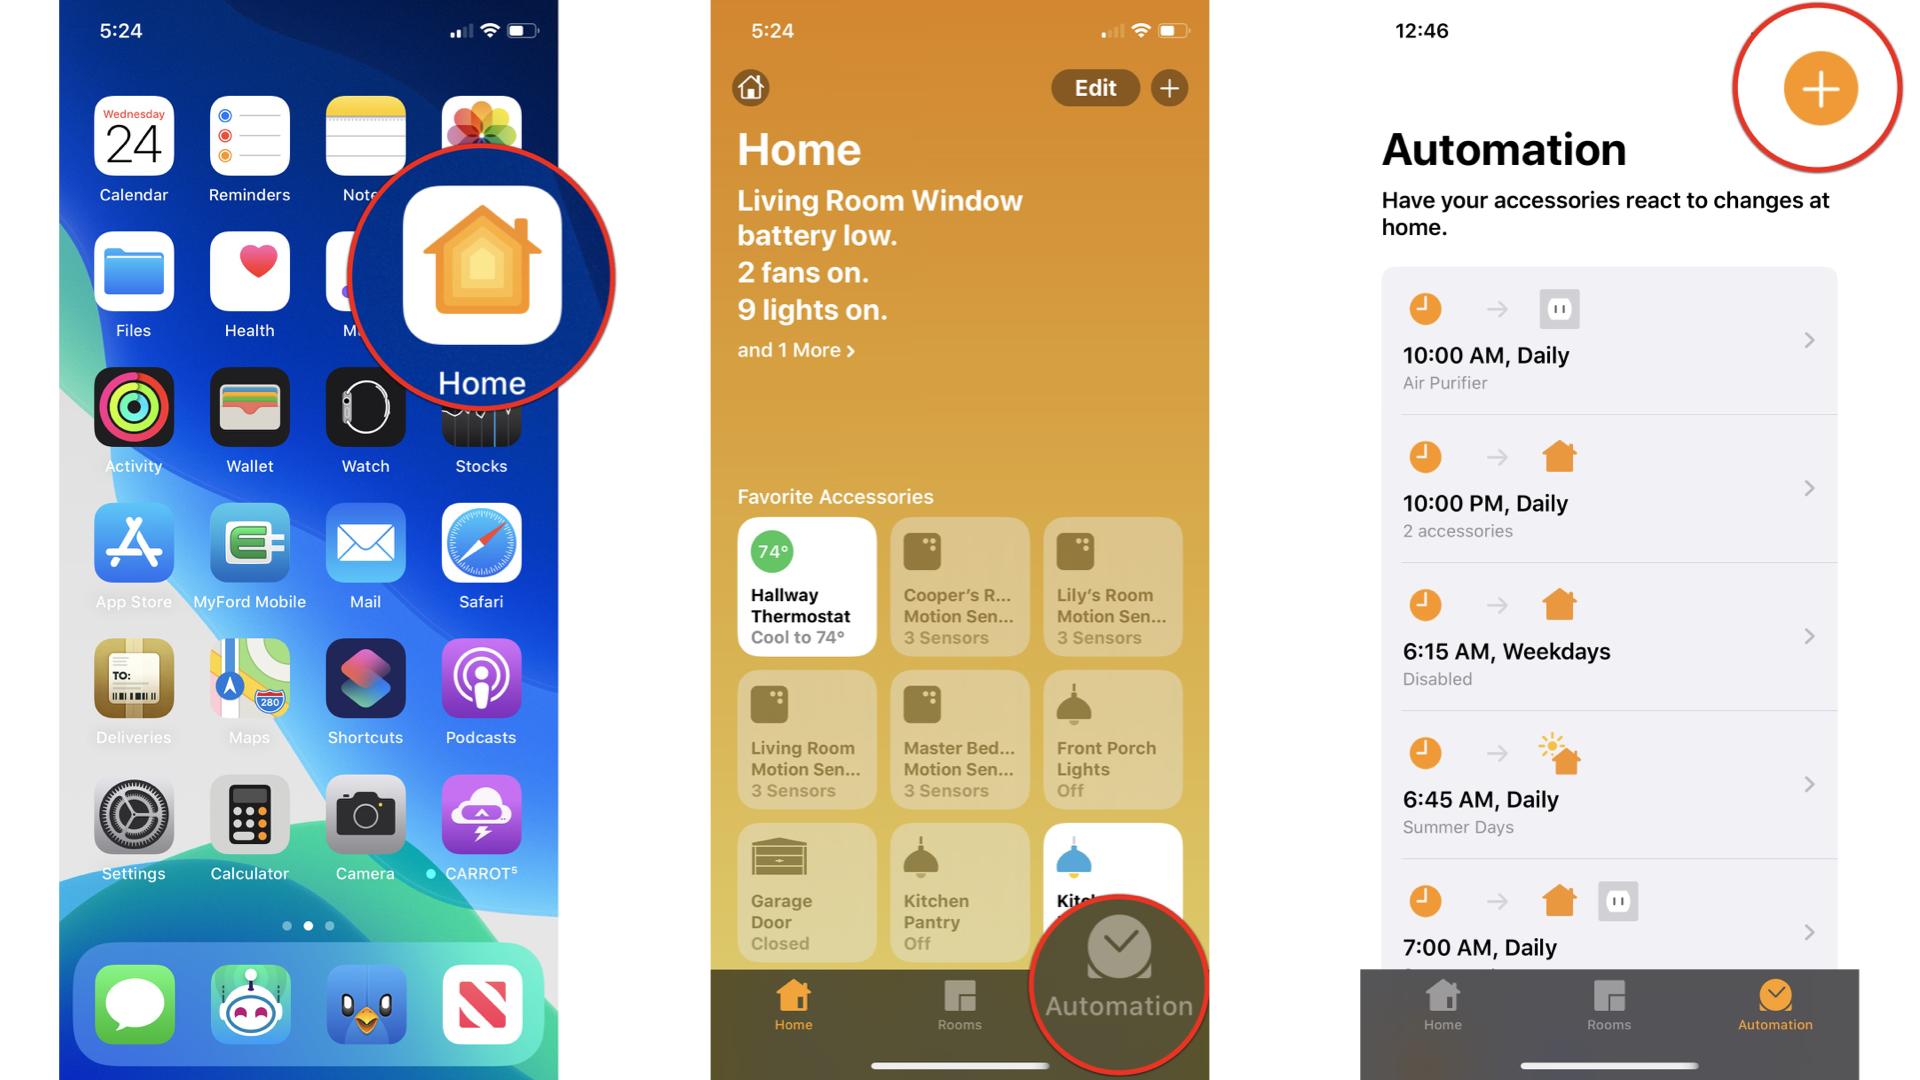 How to set up automations in the Home app on iOS 13 on the iPhone by showing steps: Launch the Home app, Tap the Automation tab, Tap the Add Button